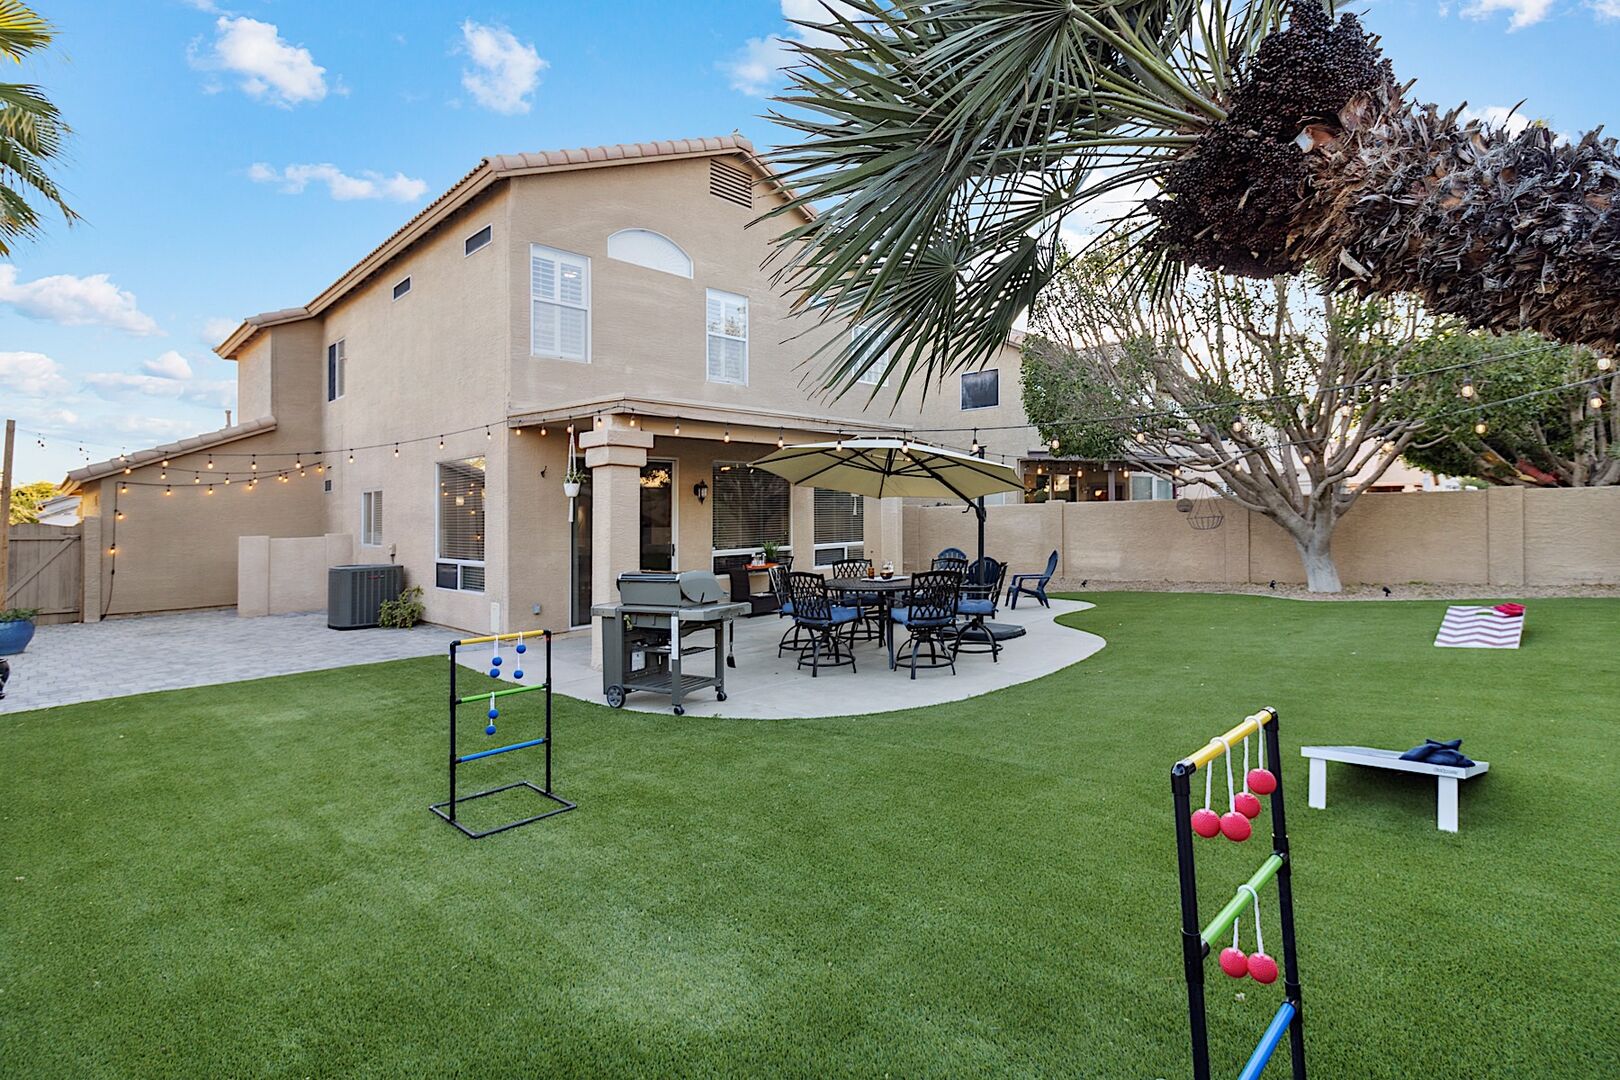 Great backyard for entertaining! BBQ Grill, Outdoor Dining Table, Fire Pit, & Yard Games like Corn Hole, Ladder Ball & Jenga!